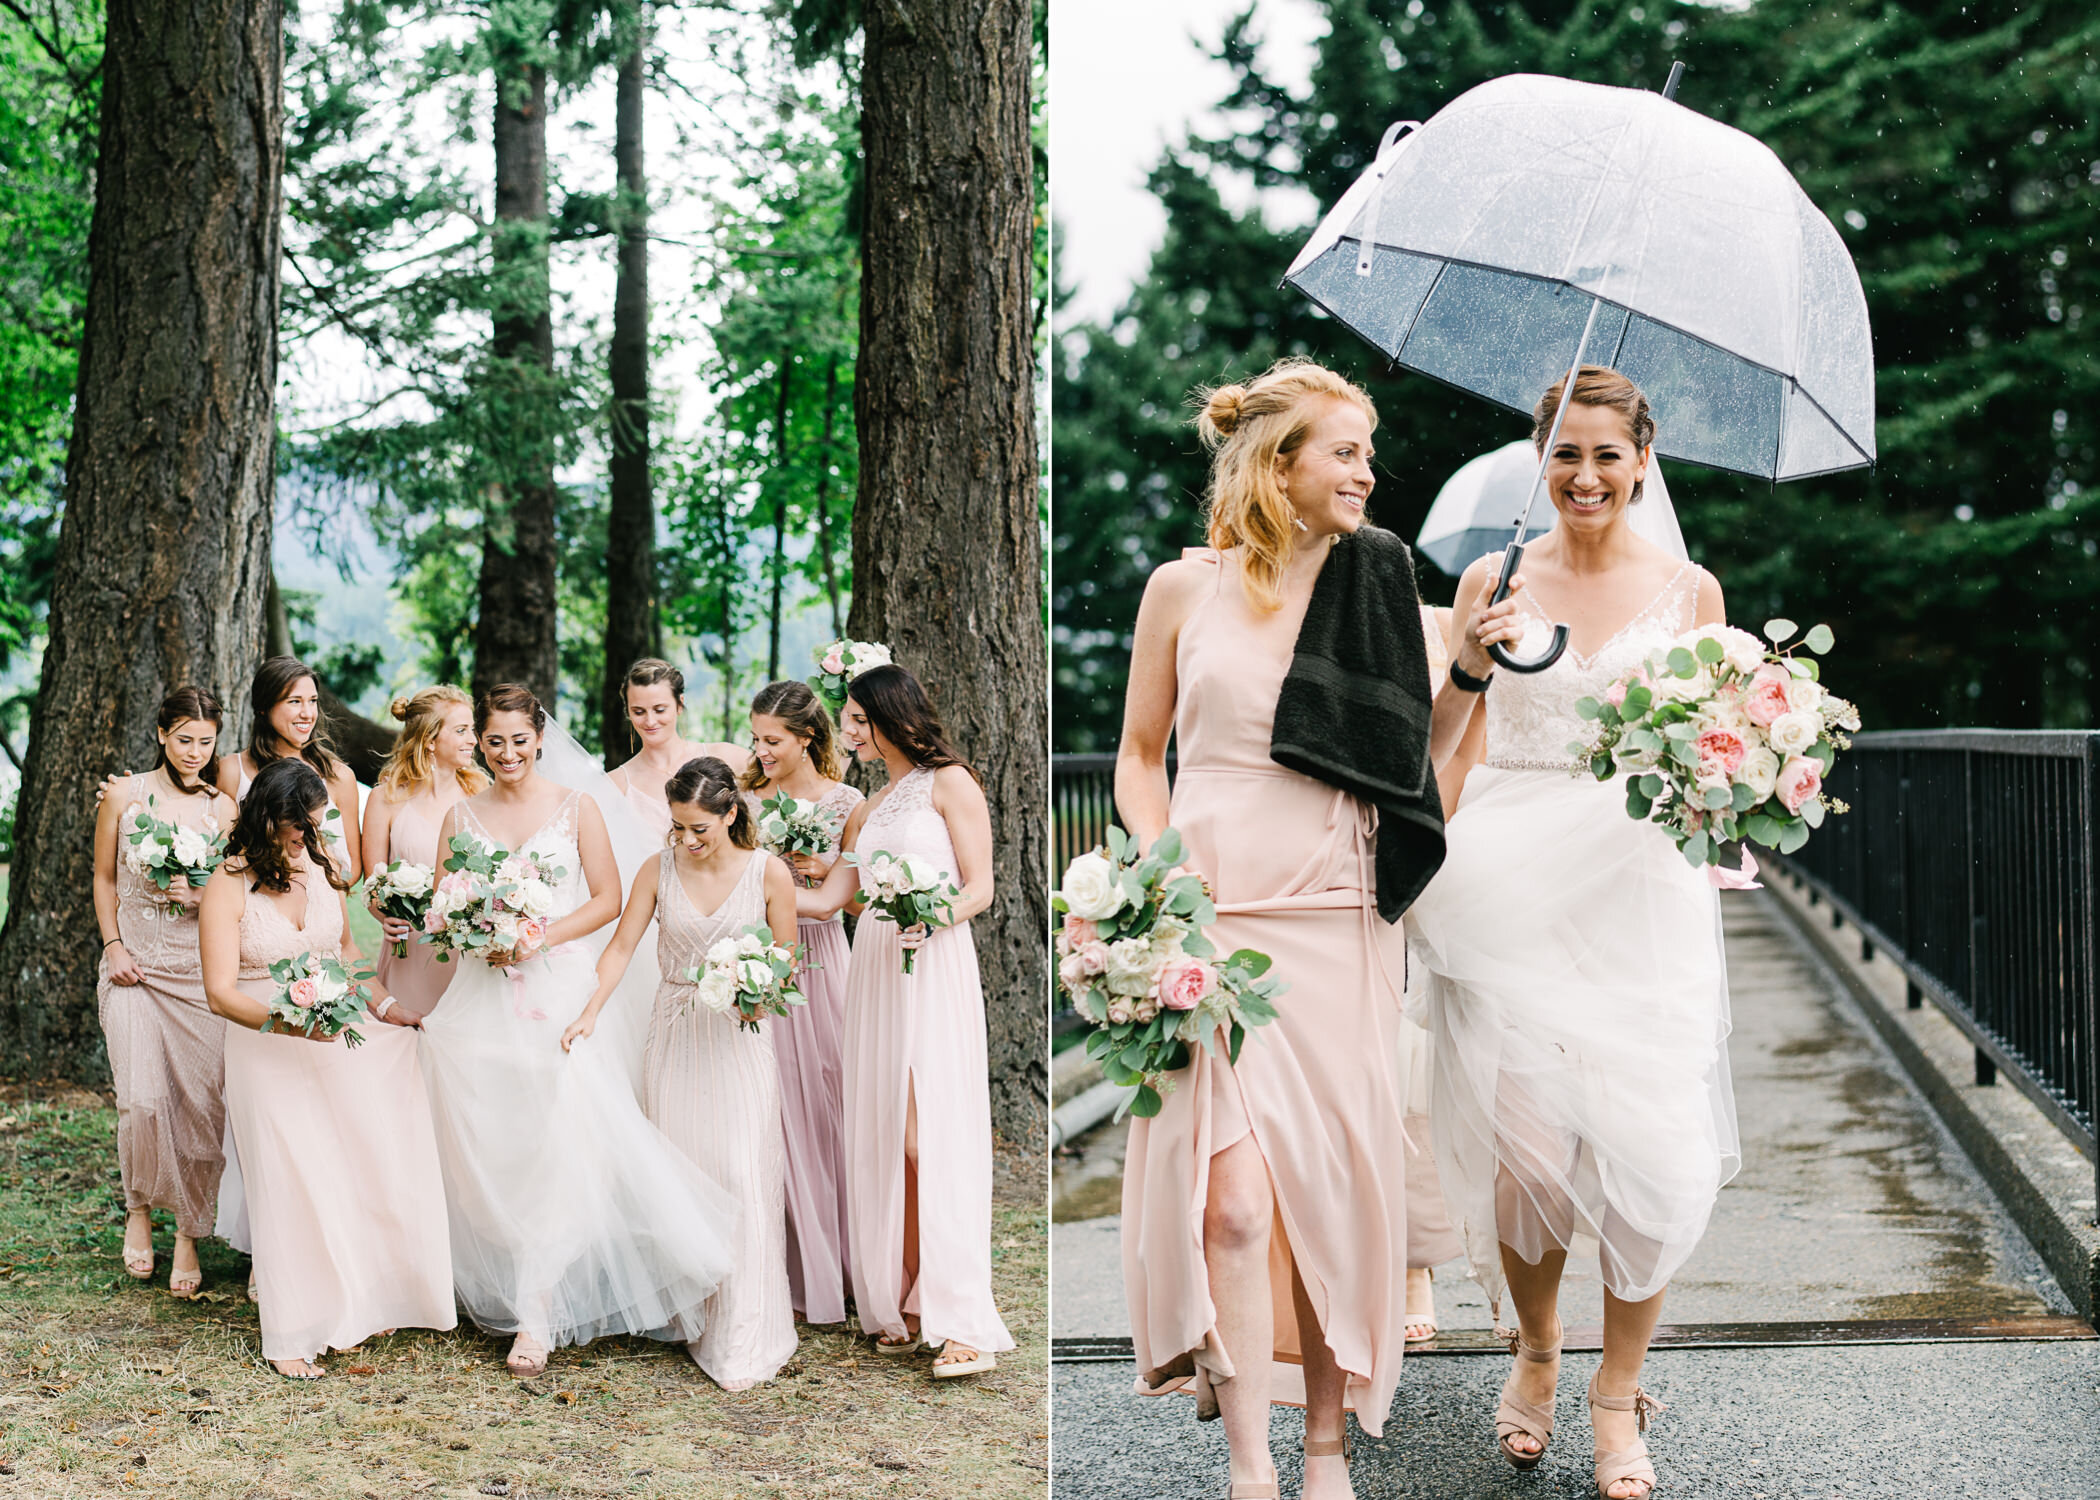  Bride walks with bridesmaids in light pink dresses under large Columbia gorge fir trees 